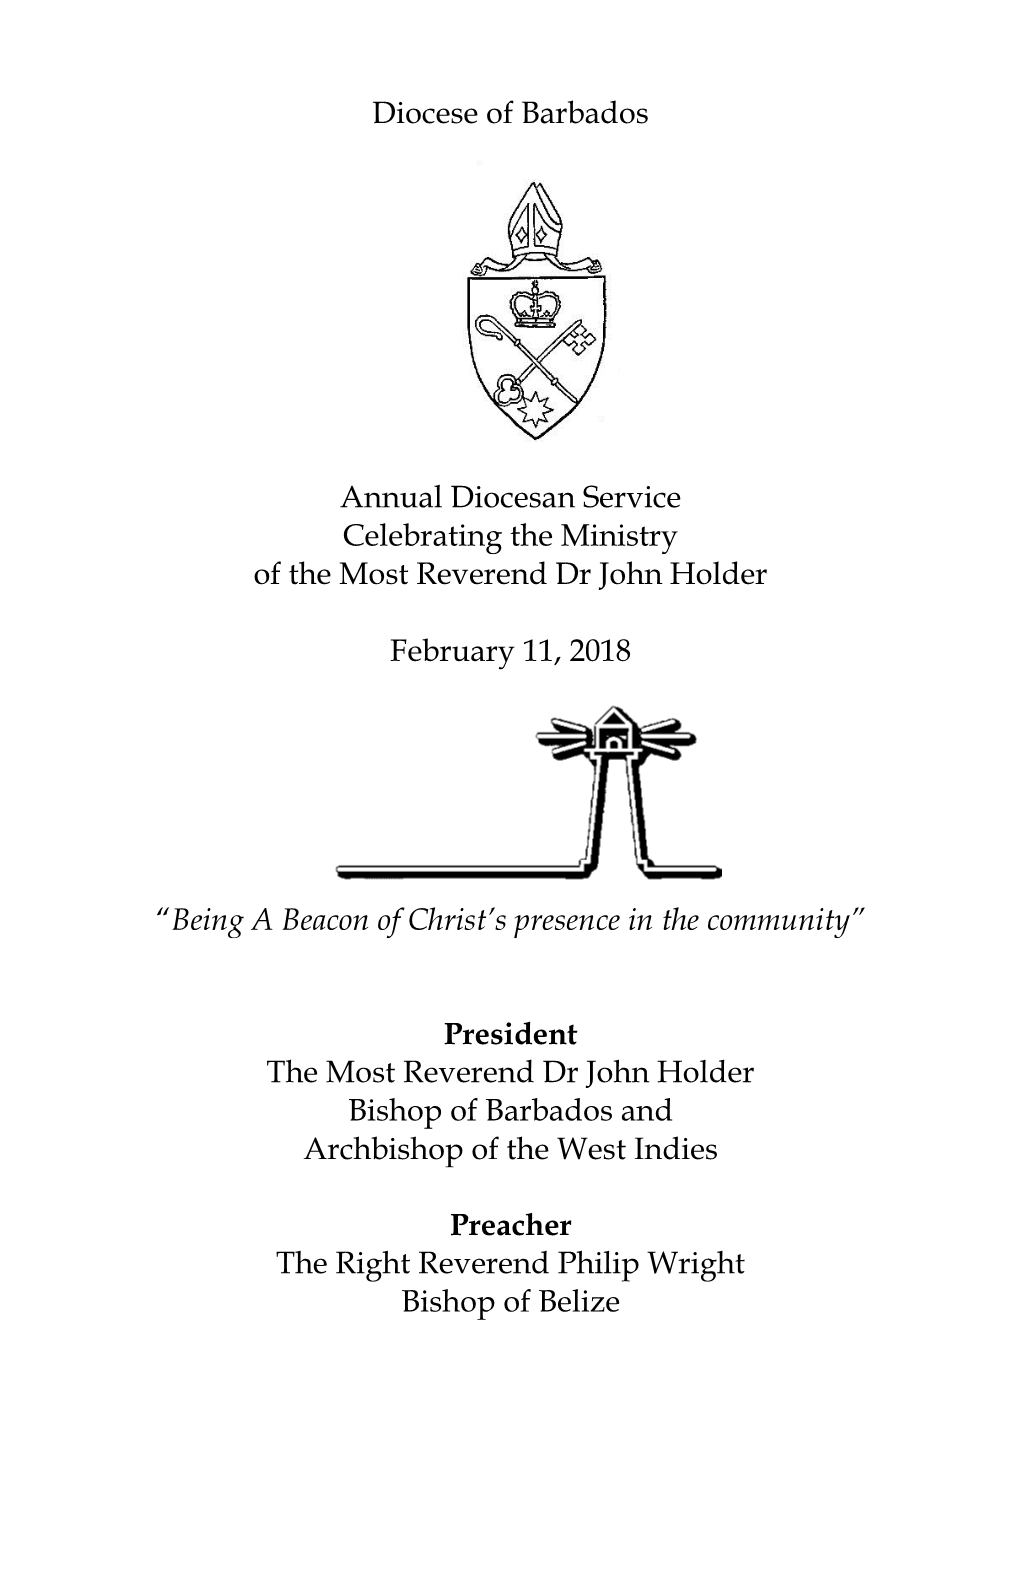 Diocese of Barbados Annual Diocesan Service Celebrating The